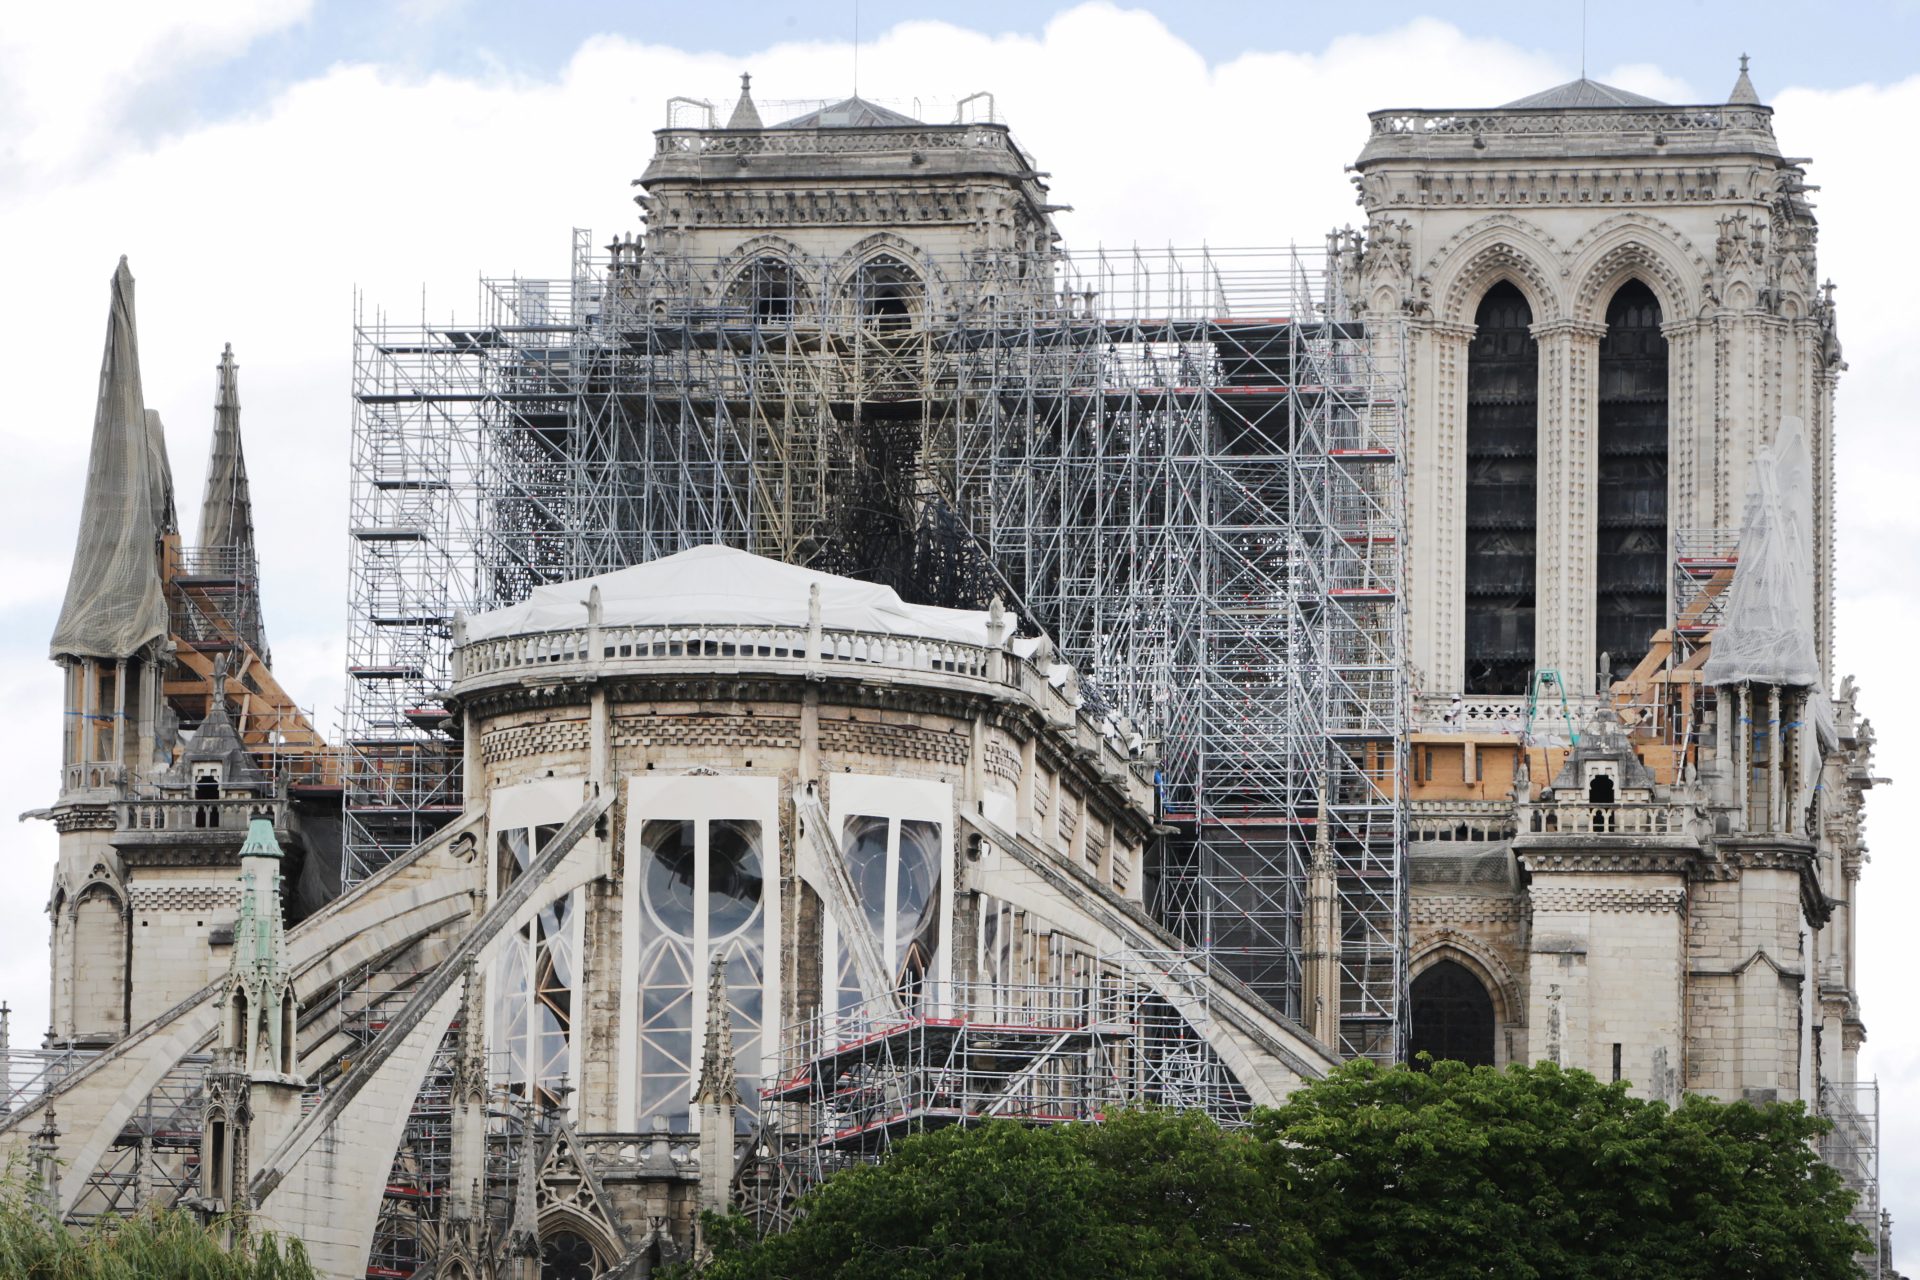 Work on the Notre Dame continues